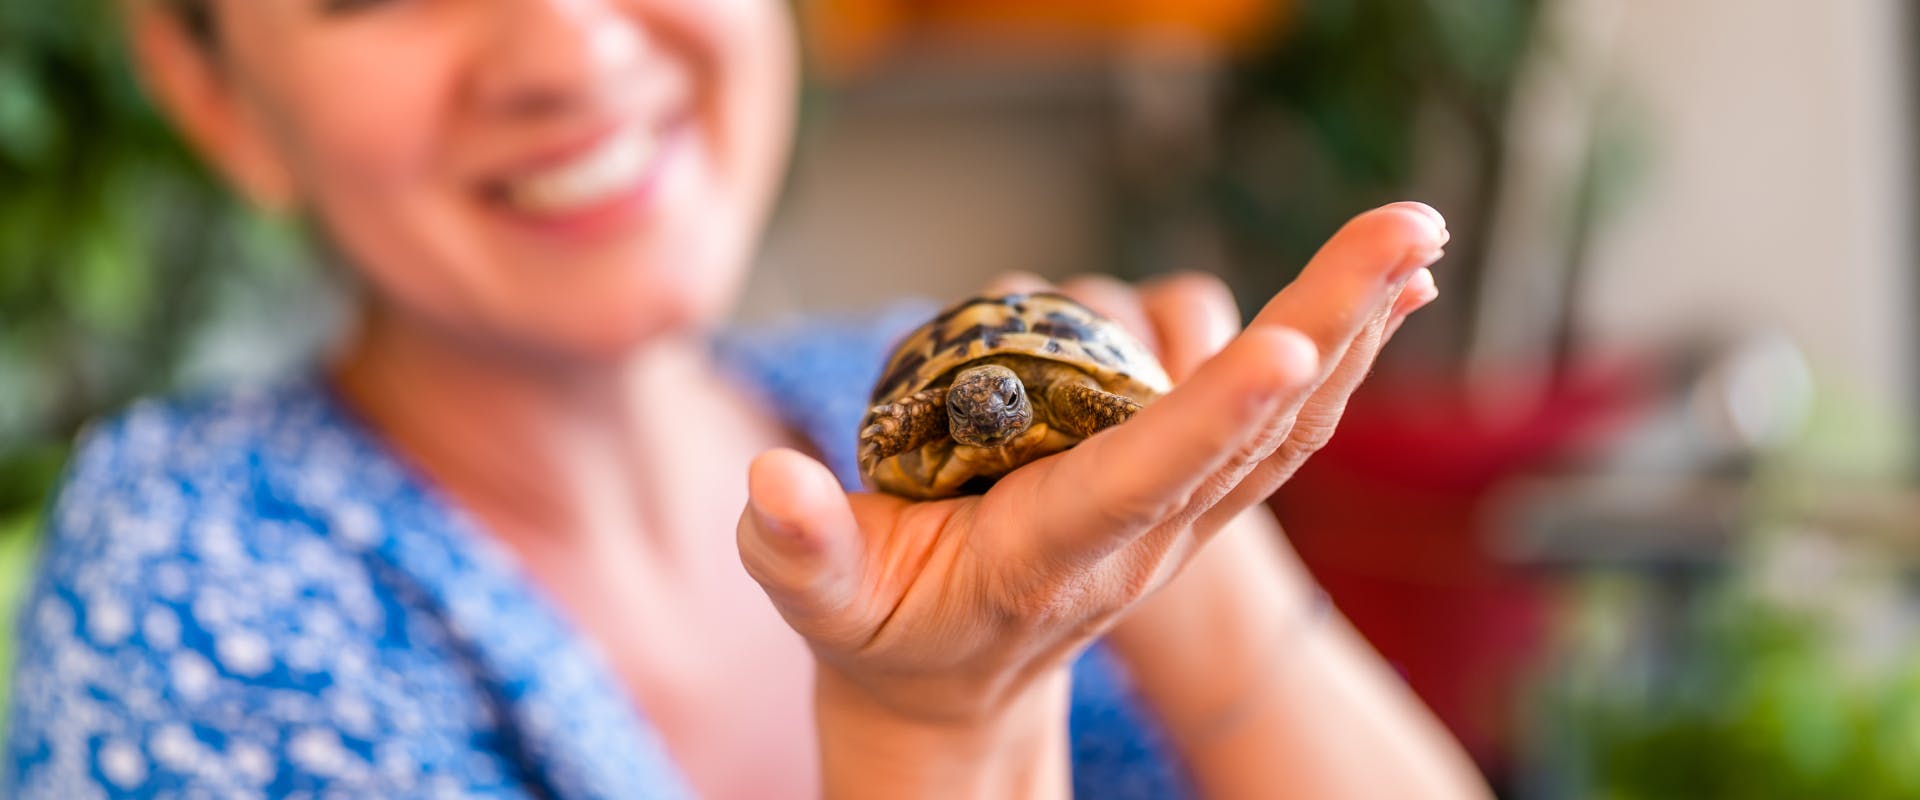 A pet sitter takes care of a tortoise.